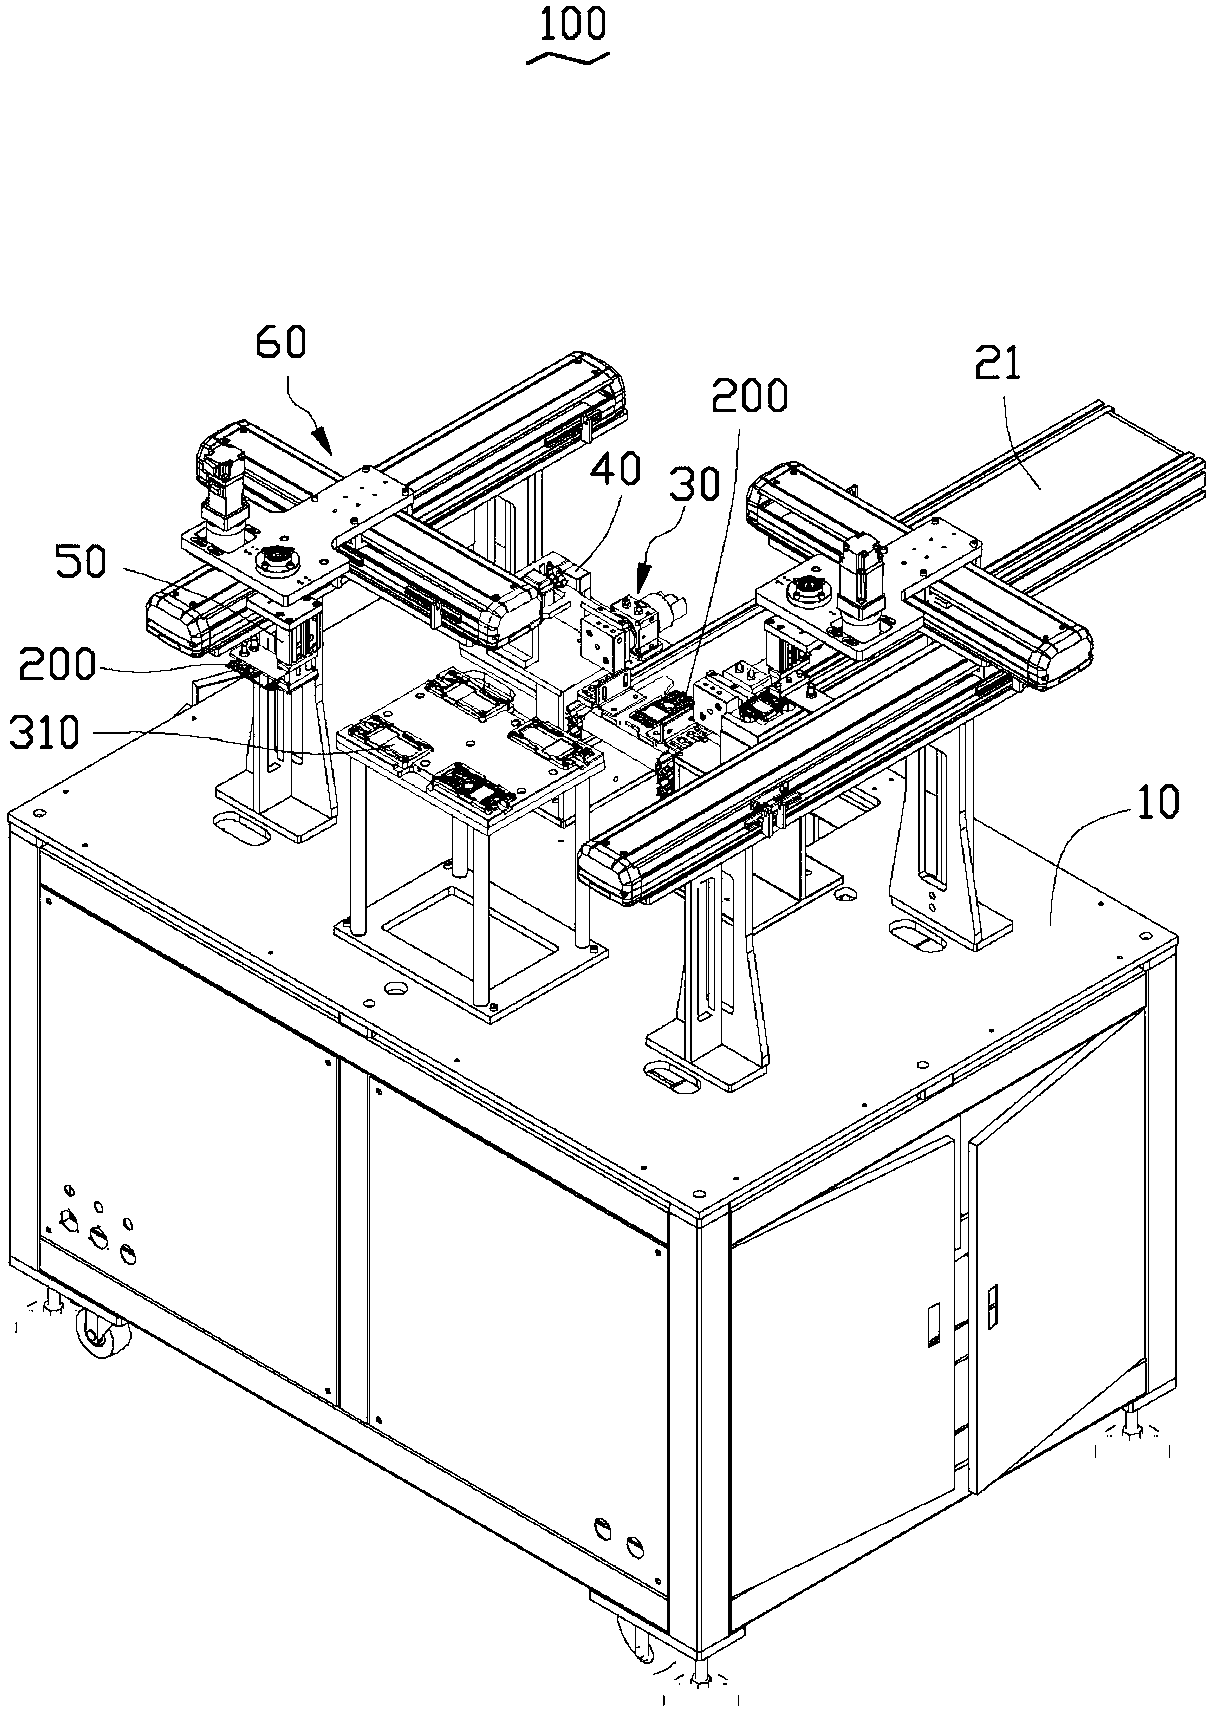 Automatic material taking apparatus